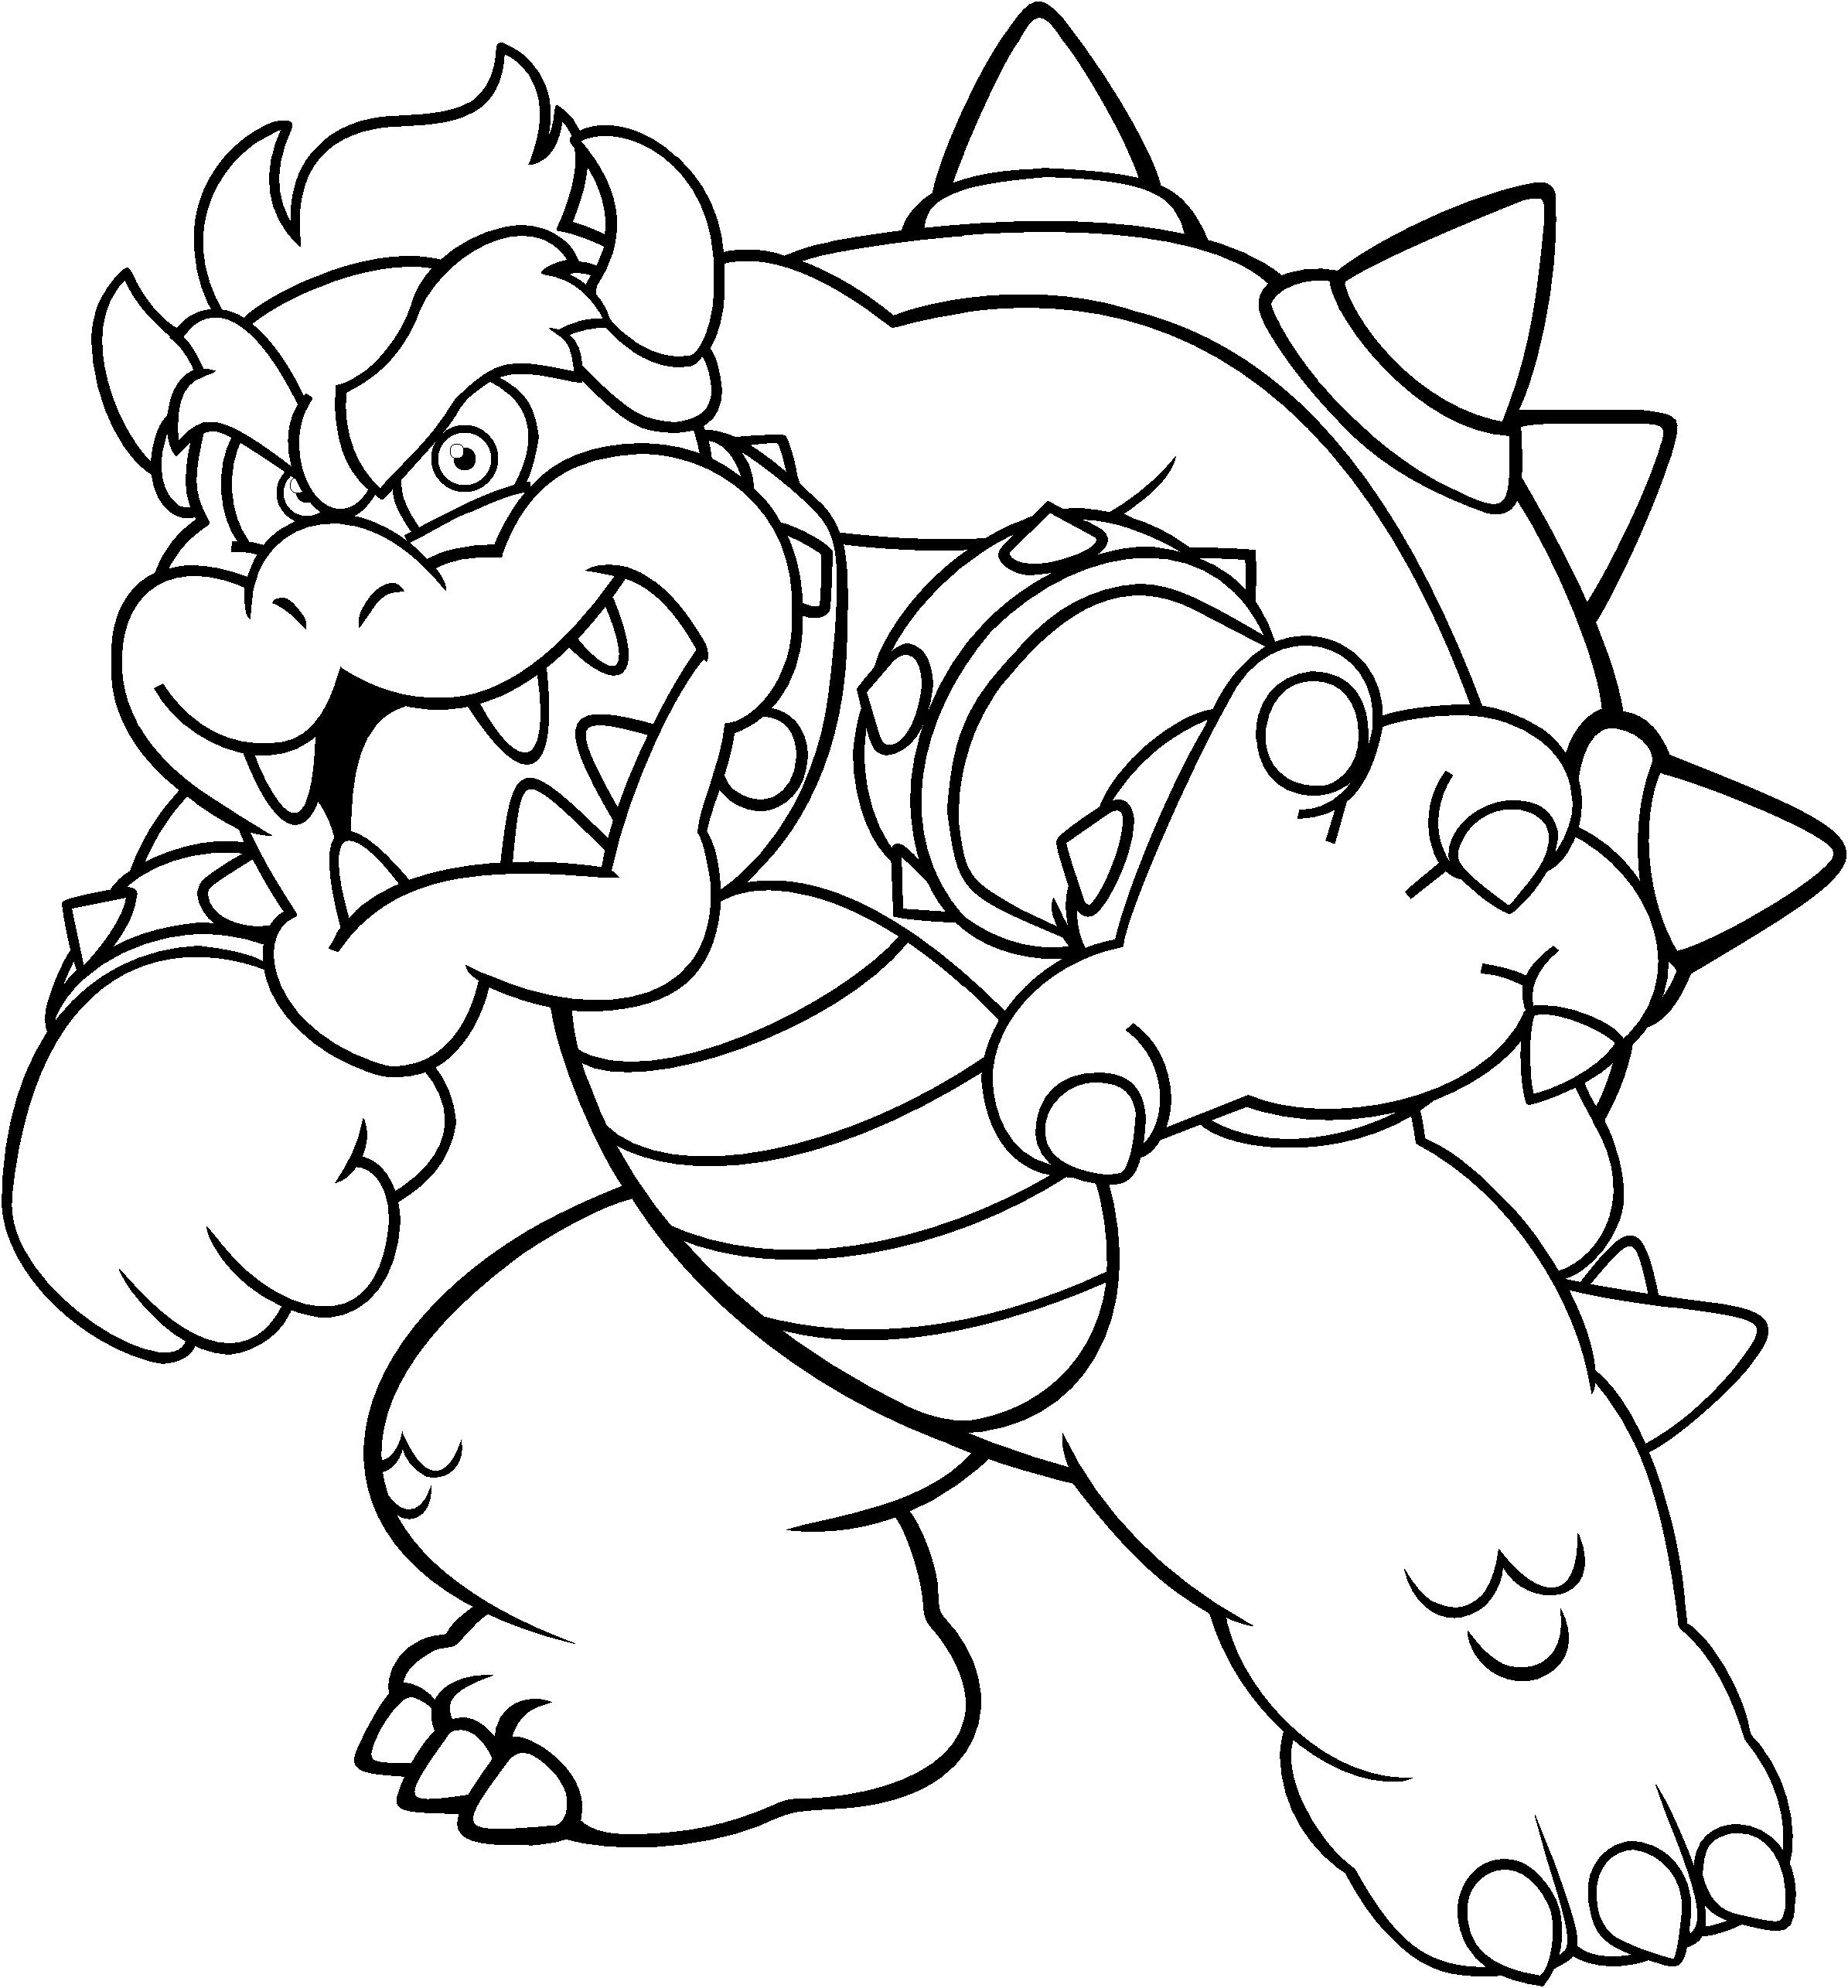 Baby Bowser - Coloring Pages for Kids and for Adults